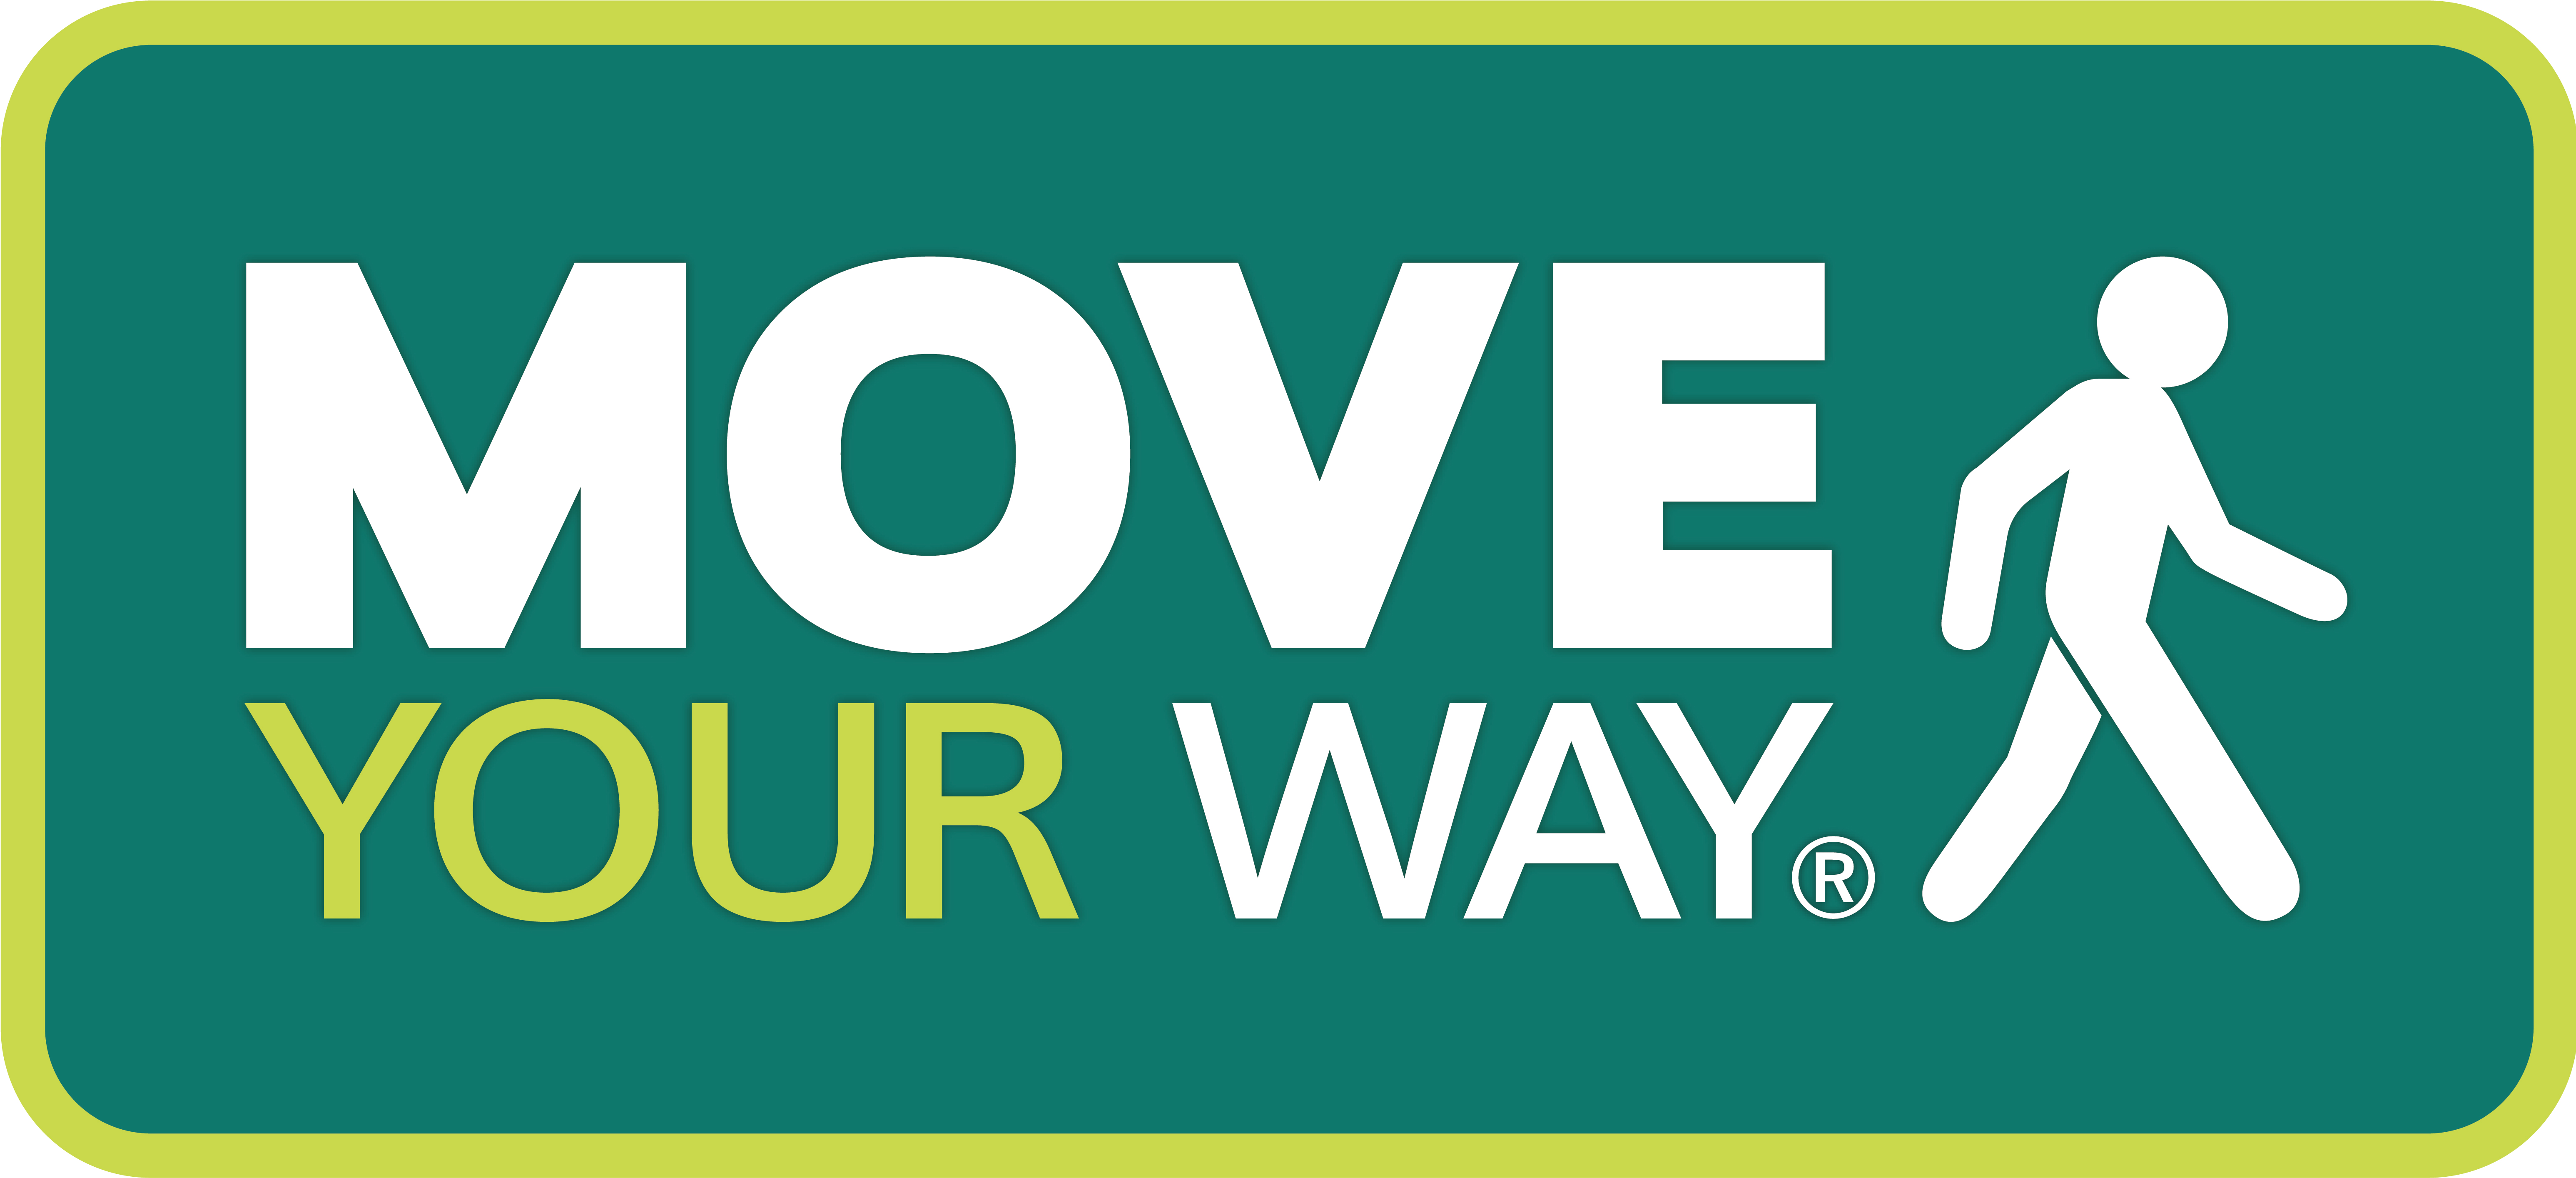 The Move Your Way logo.